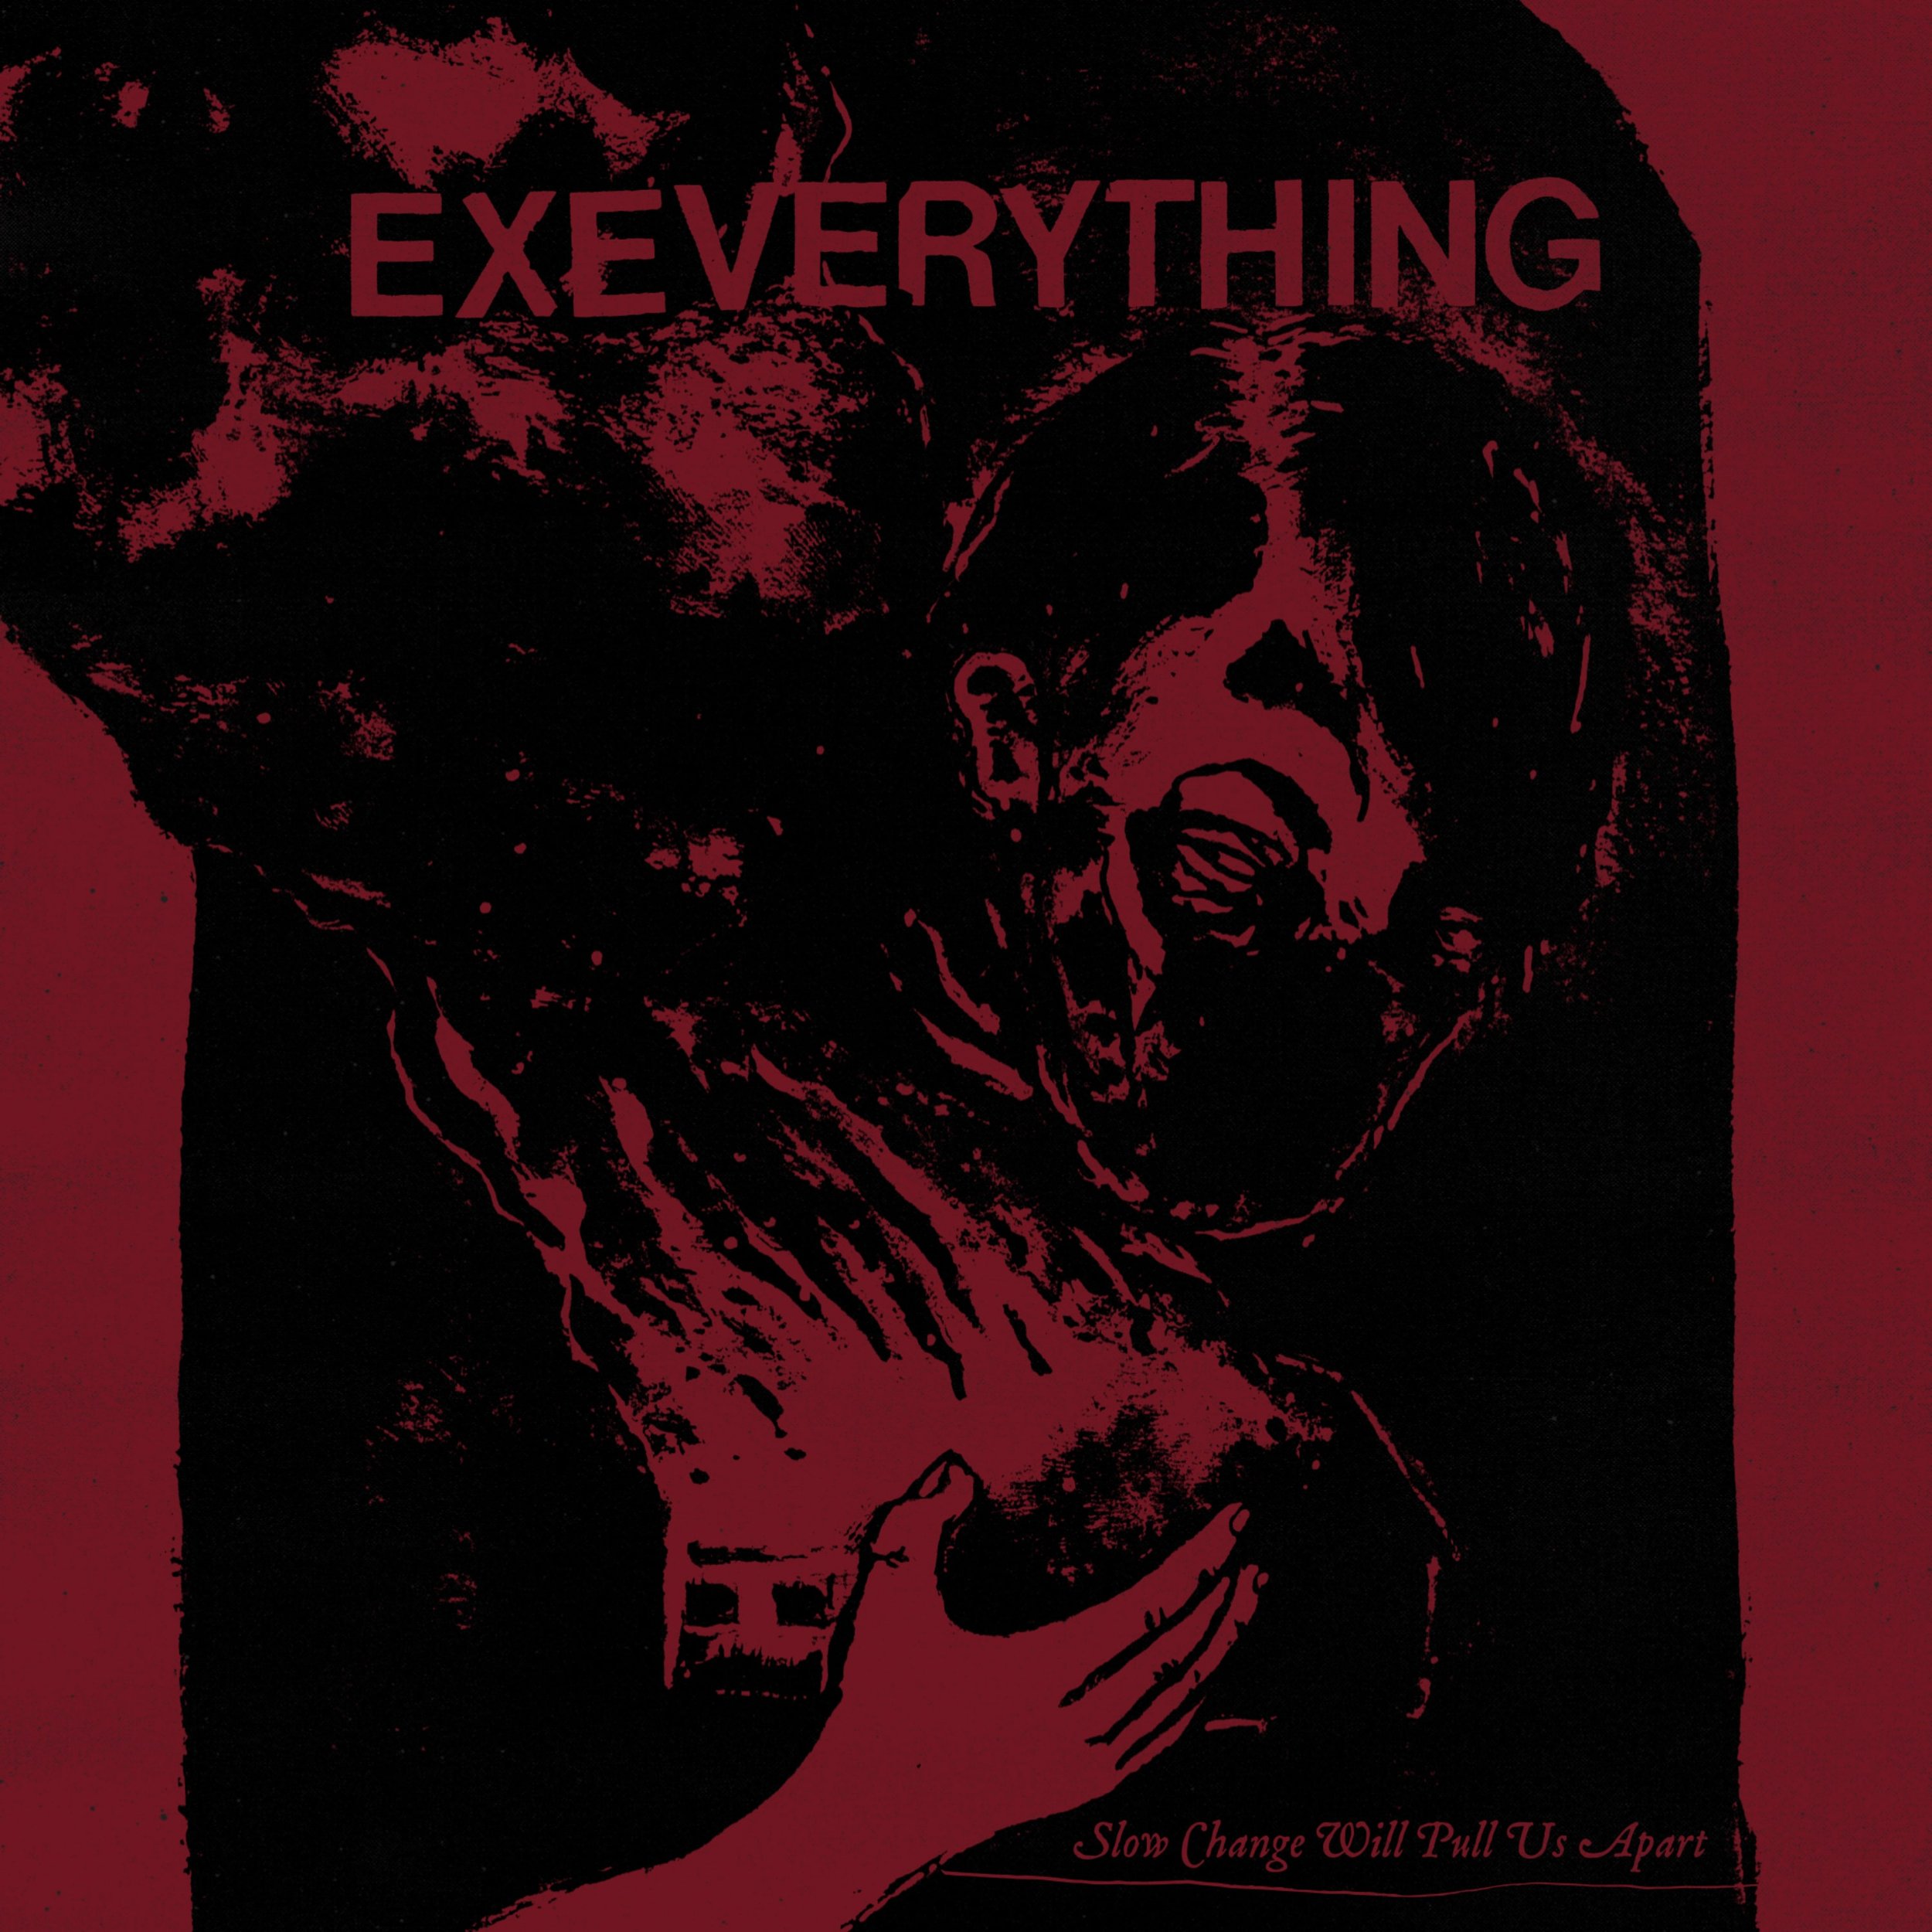 Ex Everything - Slow Change Will Pull Us Apart - Cover.jpg